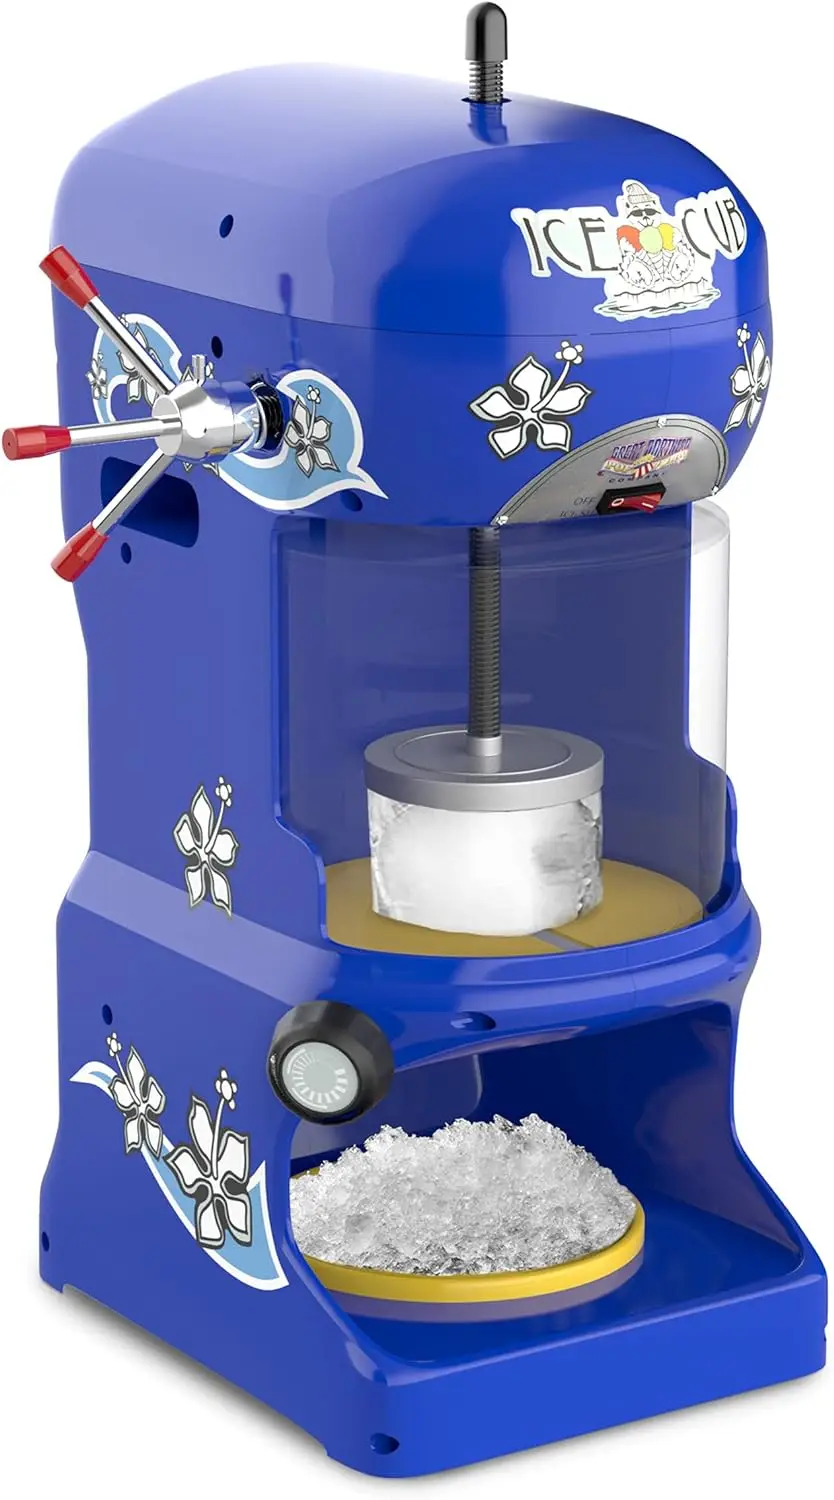 

Ice Cub Shaved Ice Machine - Powerful Crushed Ice Maker and Snow Cone Machine for Parties, Concessions, or Events by Great North